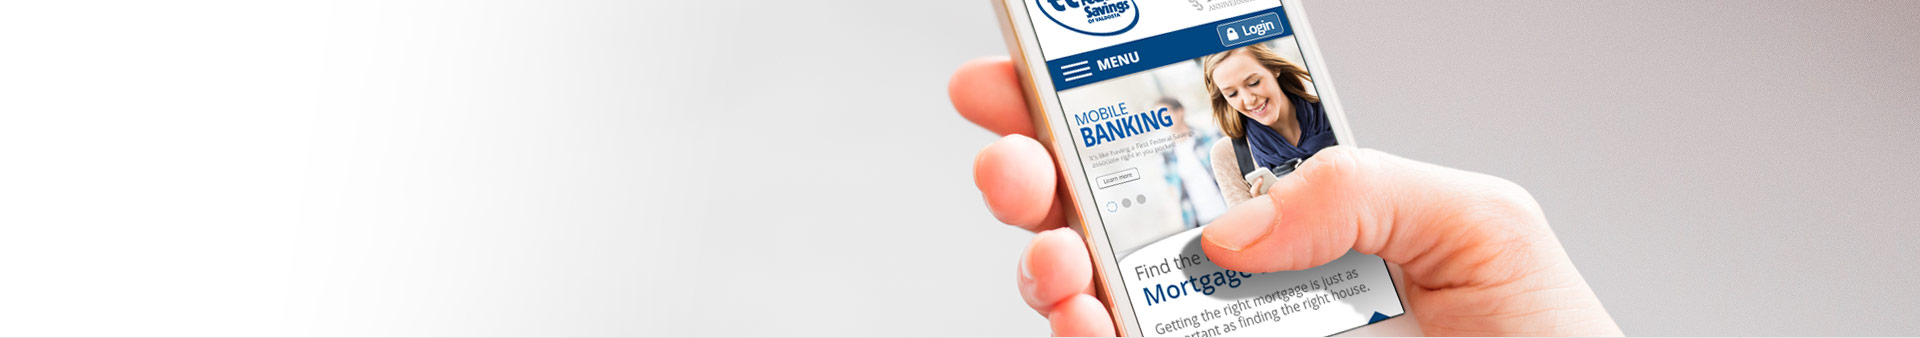 subbanner-mobile-banking